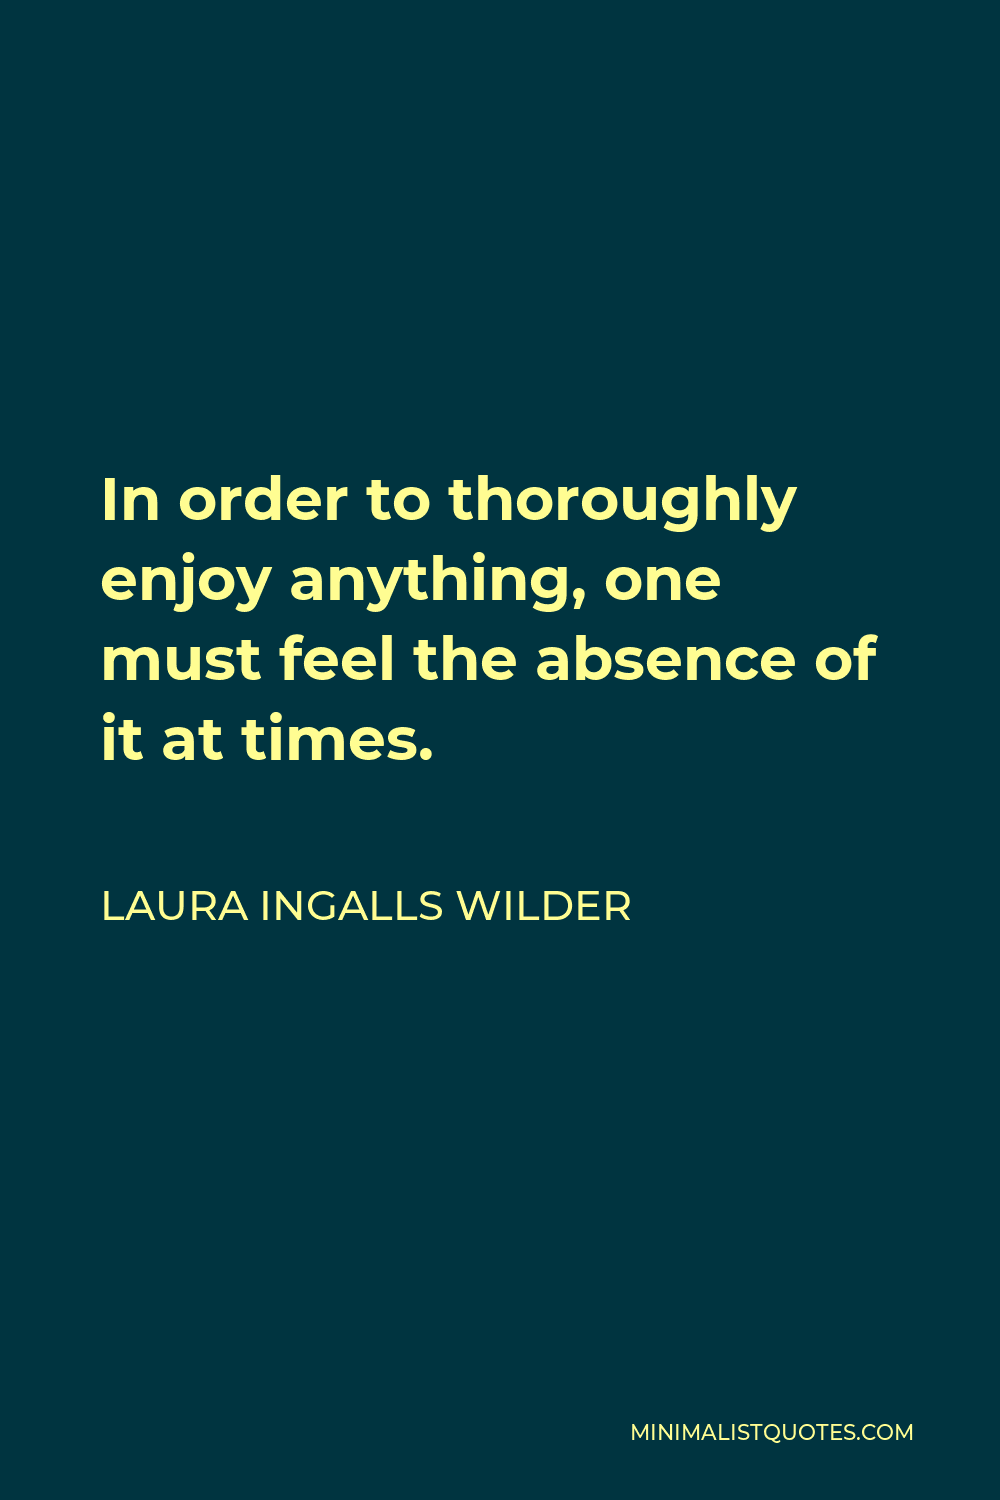 Laura Ingalls Wilder Quote - In order to thoroughly enjoy anything, one must feel the absence of it at times.